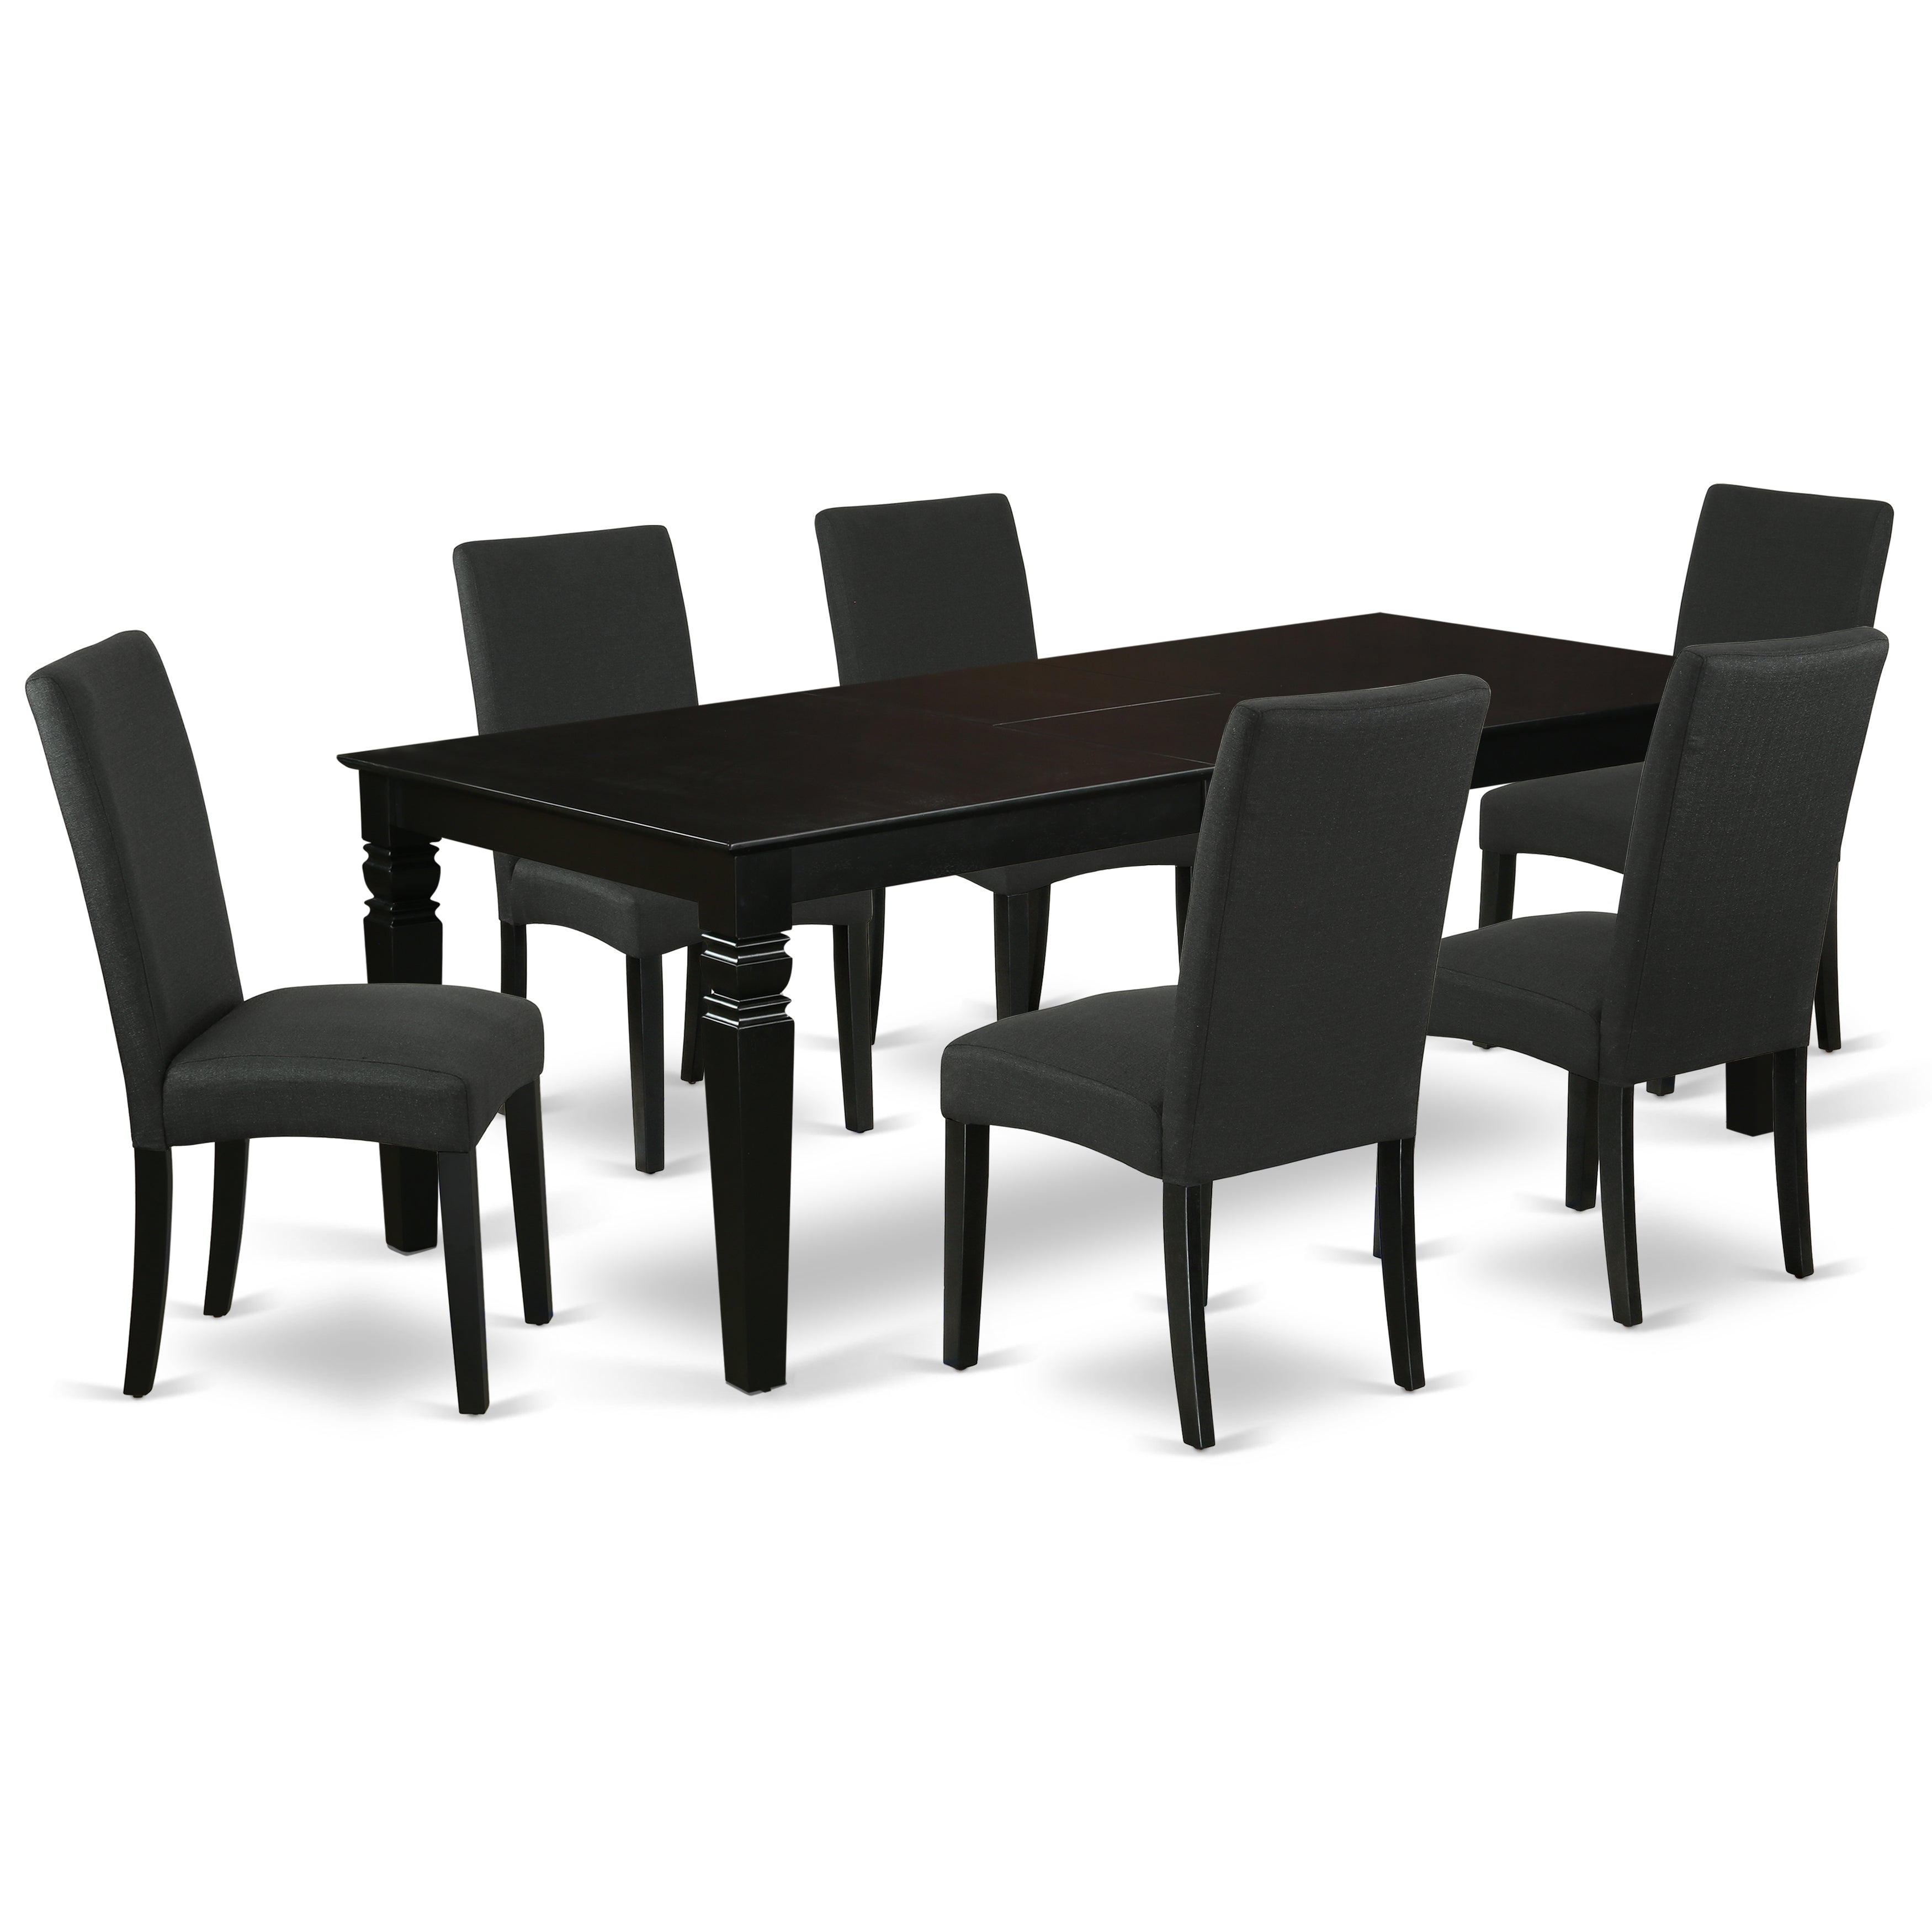 Logan 7 PC 84" Traditional Dining room Table With Leaf And Parson Chairs Set in Black